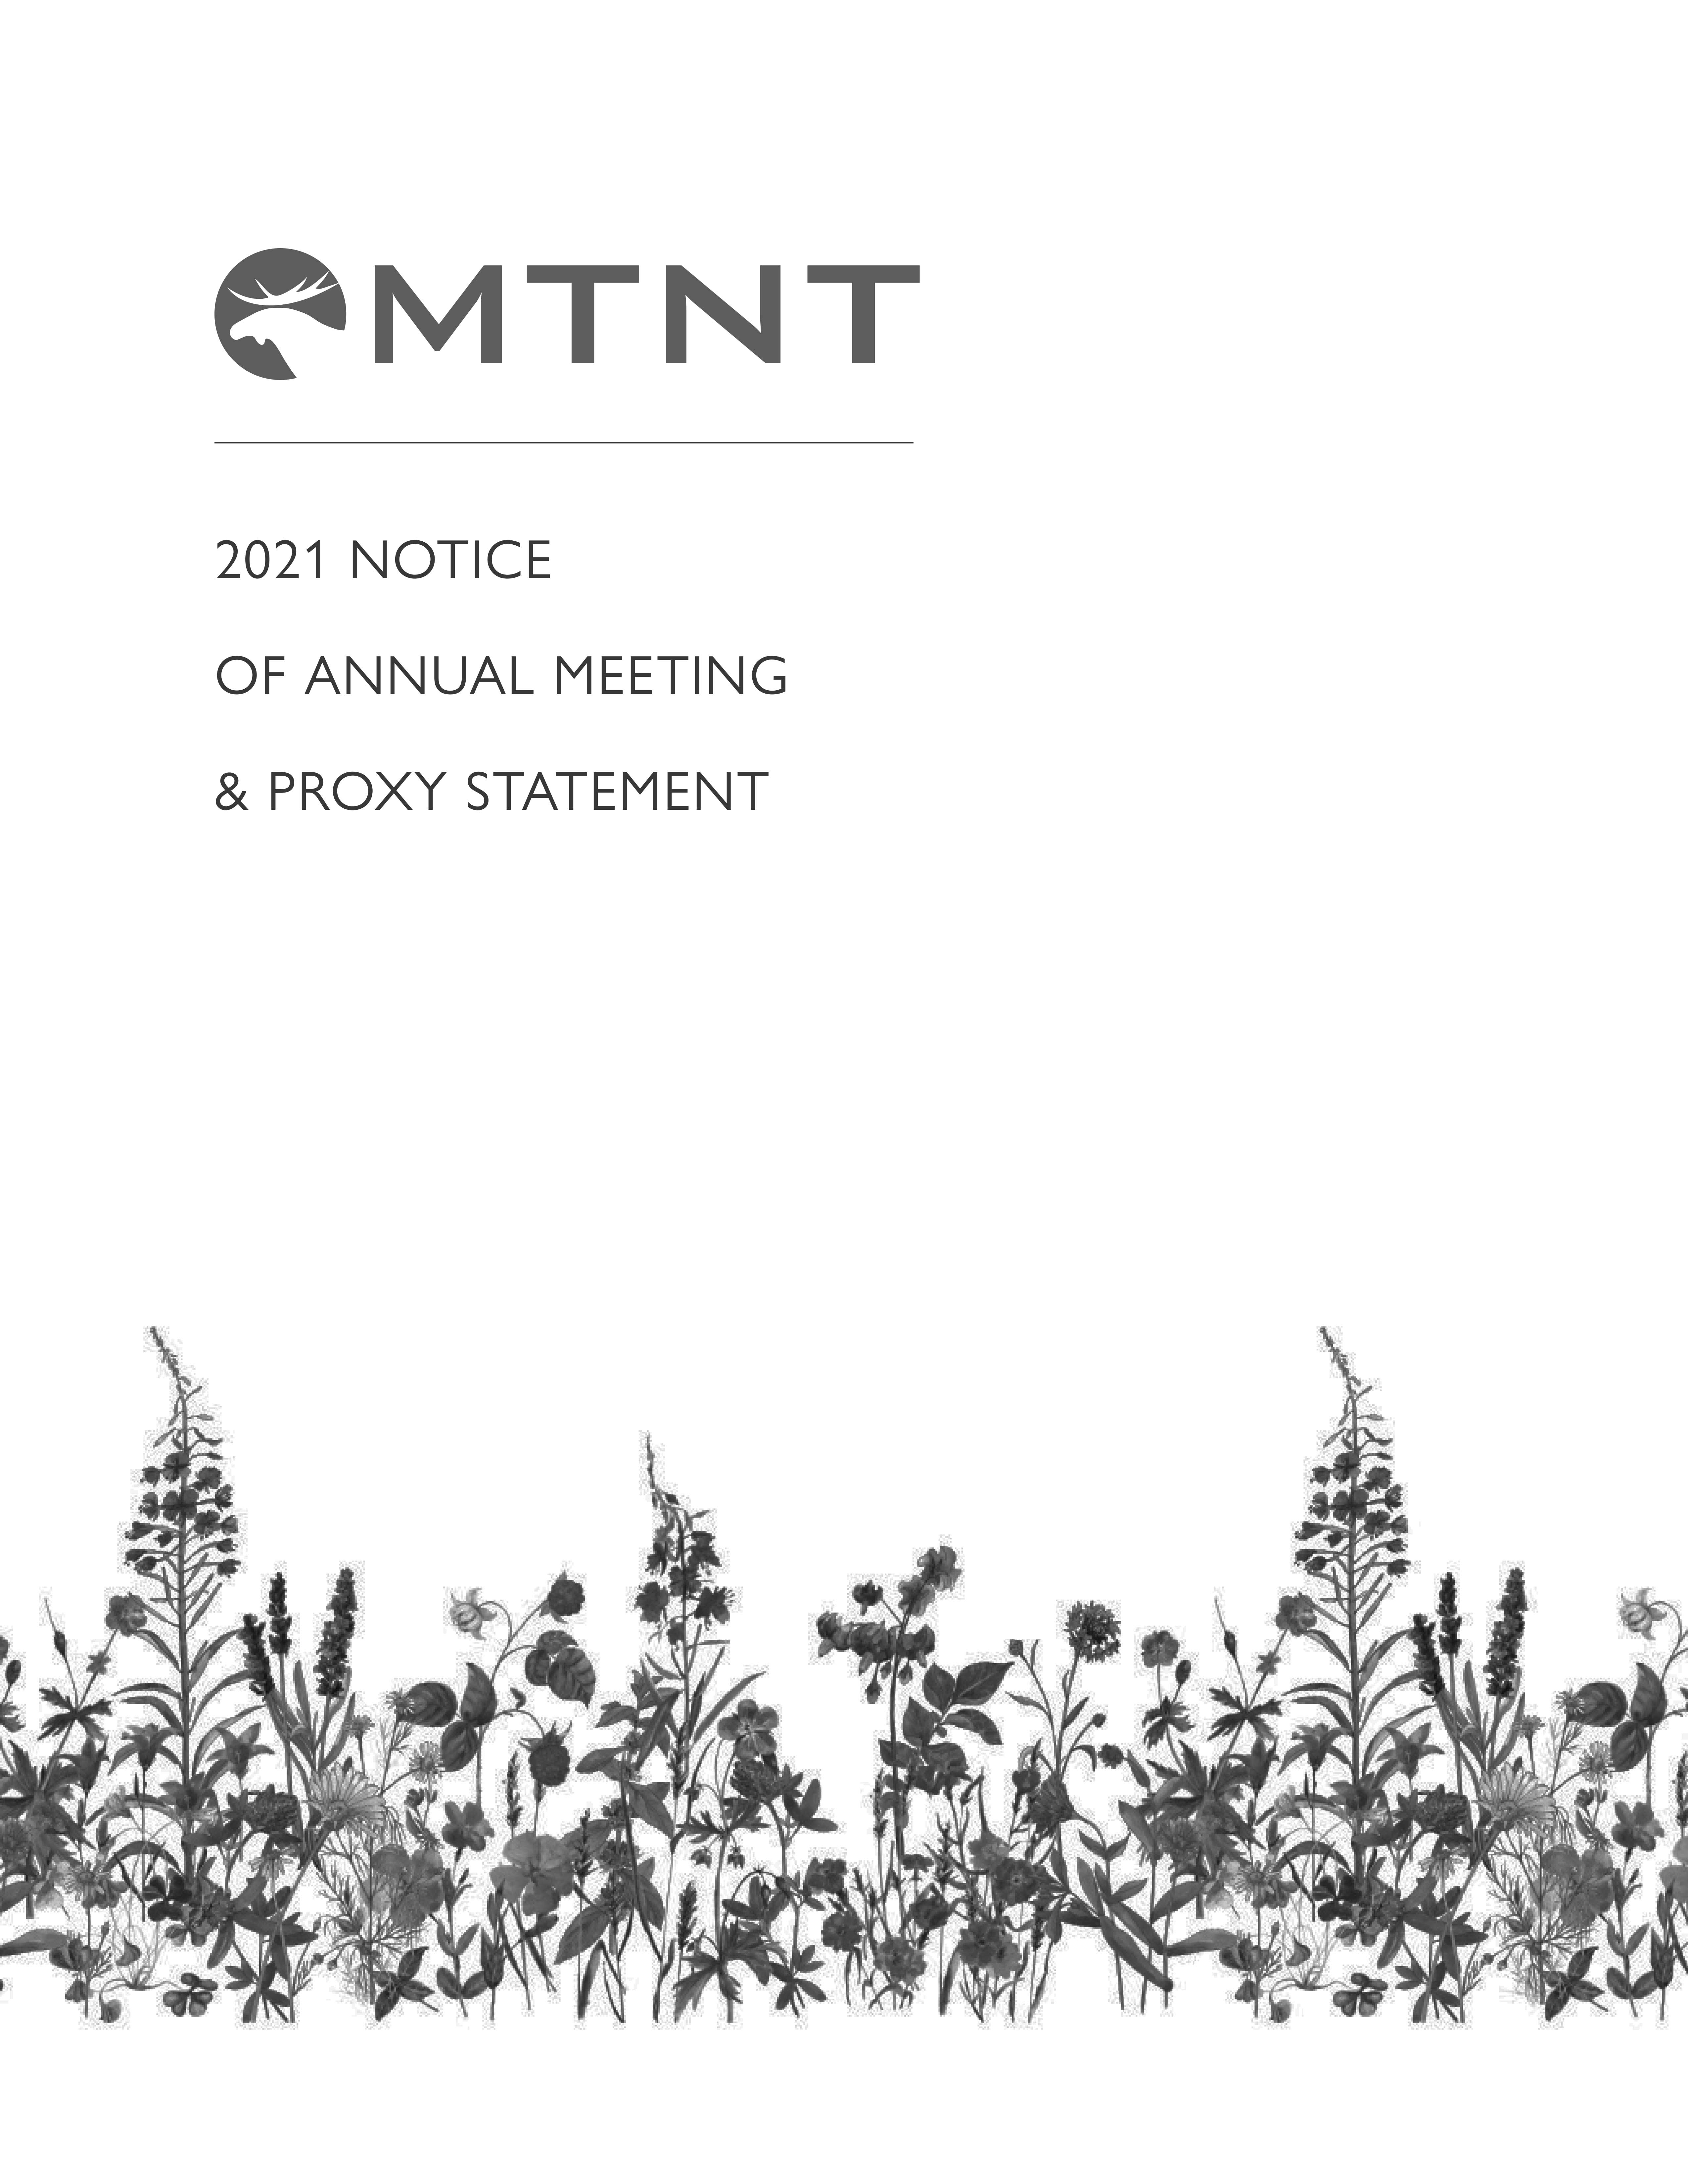 2021 MTNT Proxy Statement and Booklet Final-1.jpg